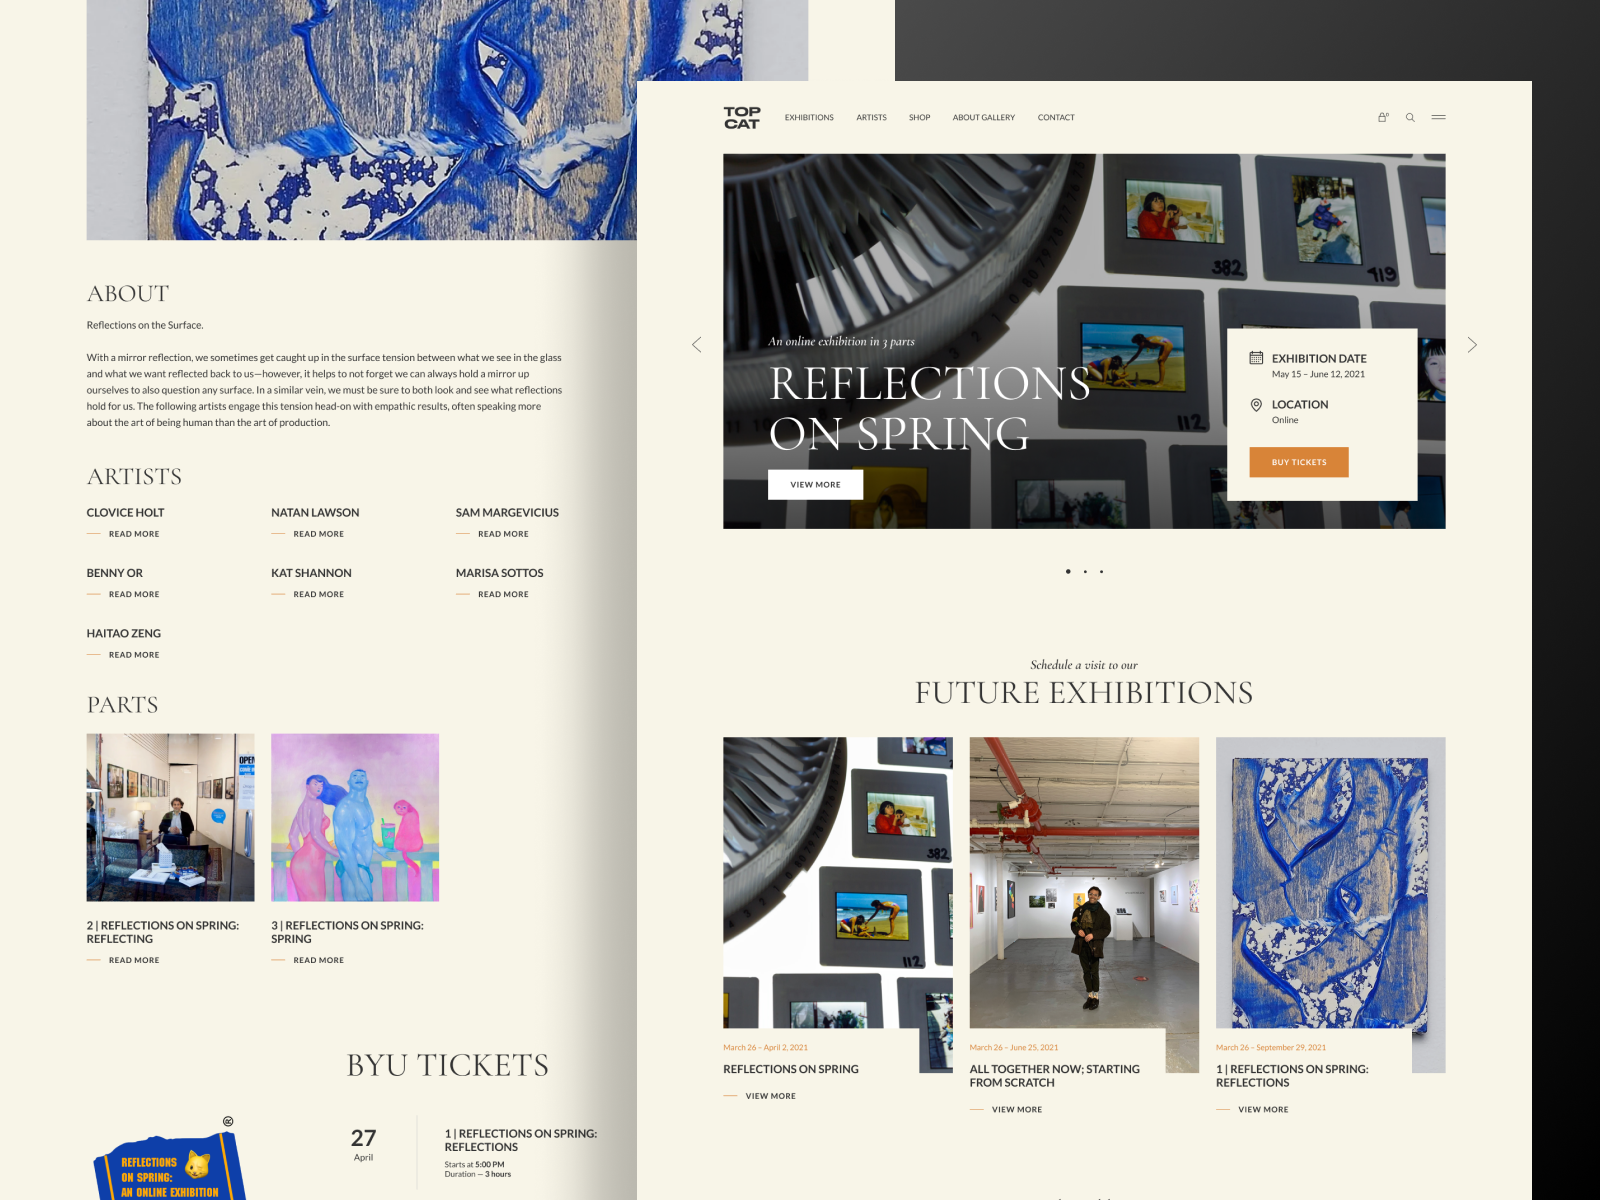 Art gallery online store and a ticket office by Oleg Tsukanov on Dribbble